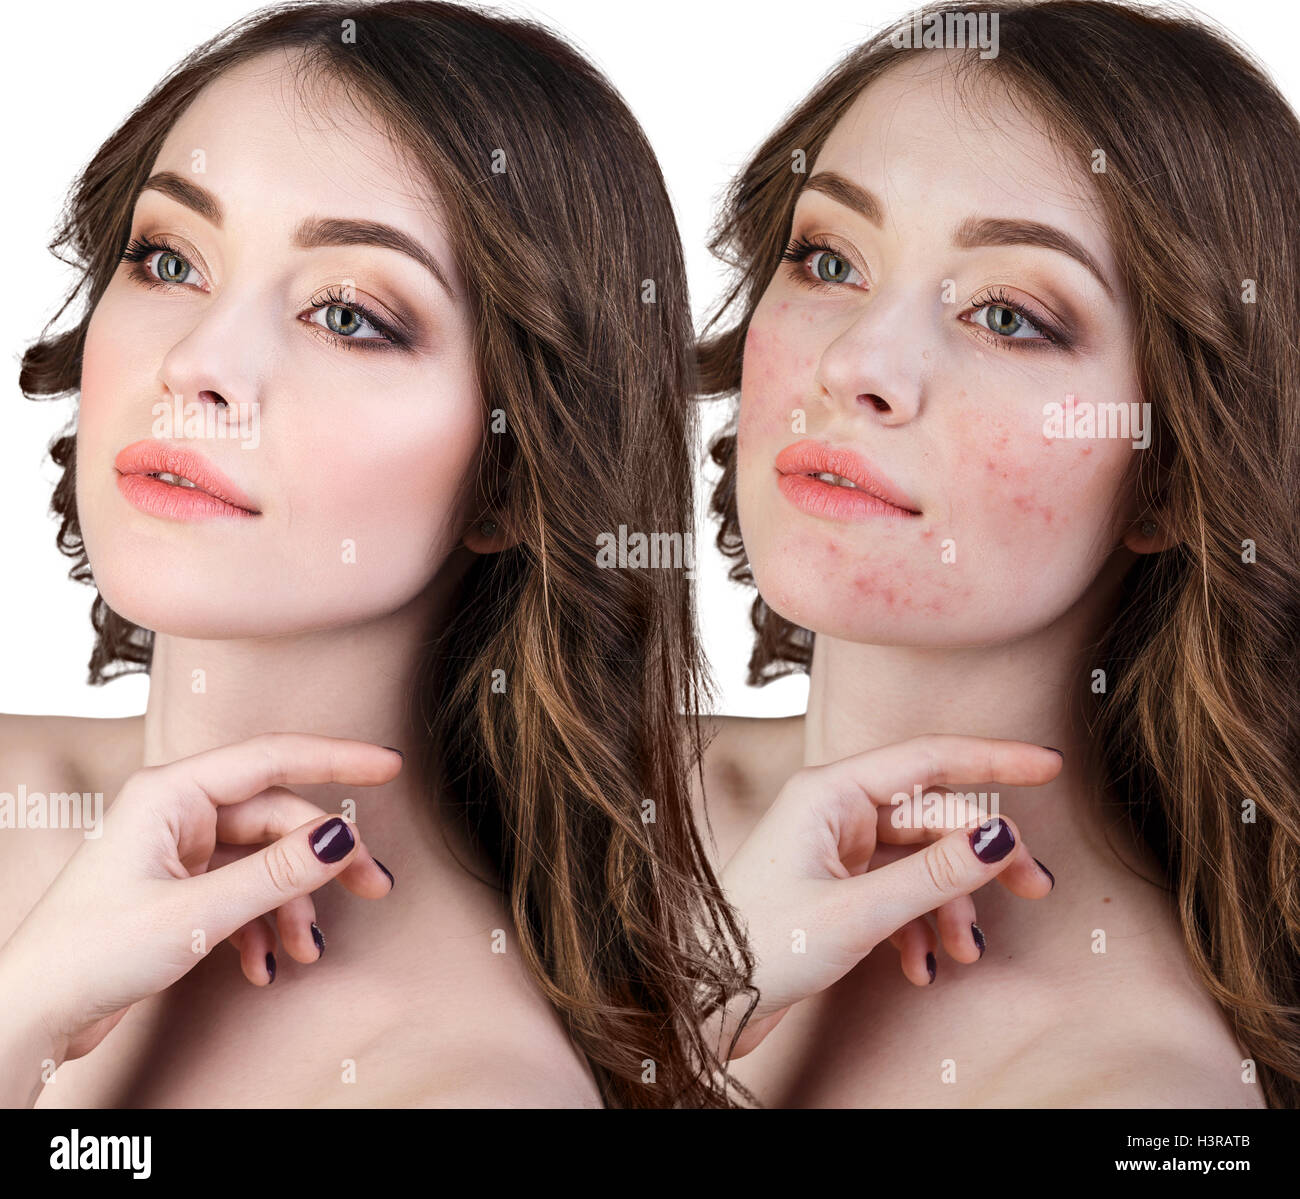 Woman with problem skin on her face Stock Photo